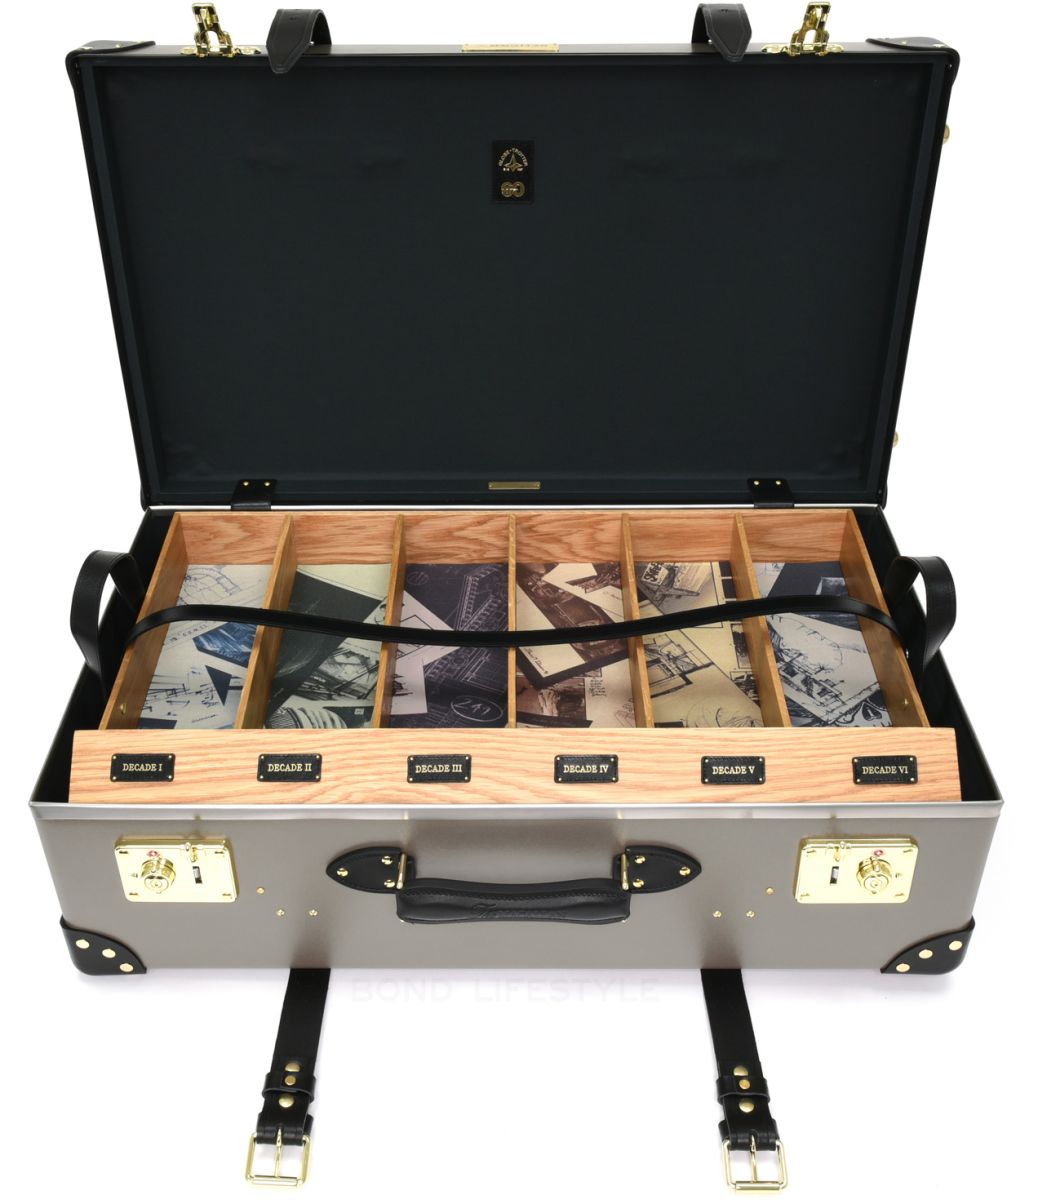 harrods globe-trotter case the macallan limited edition